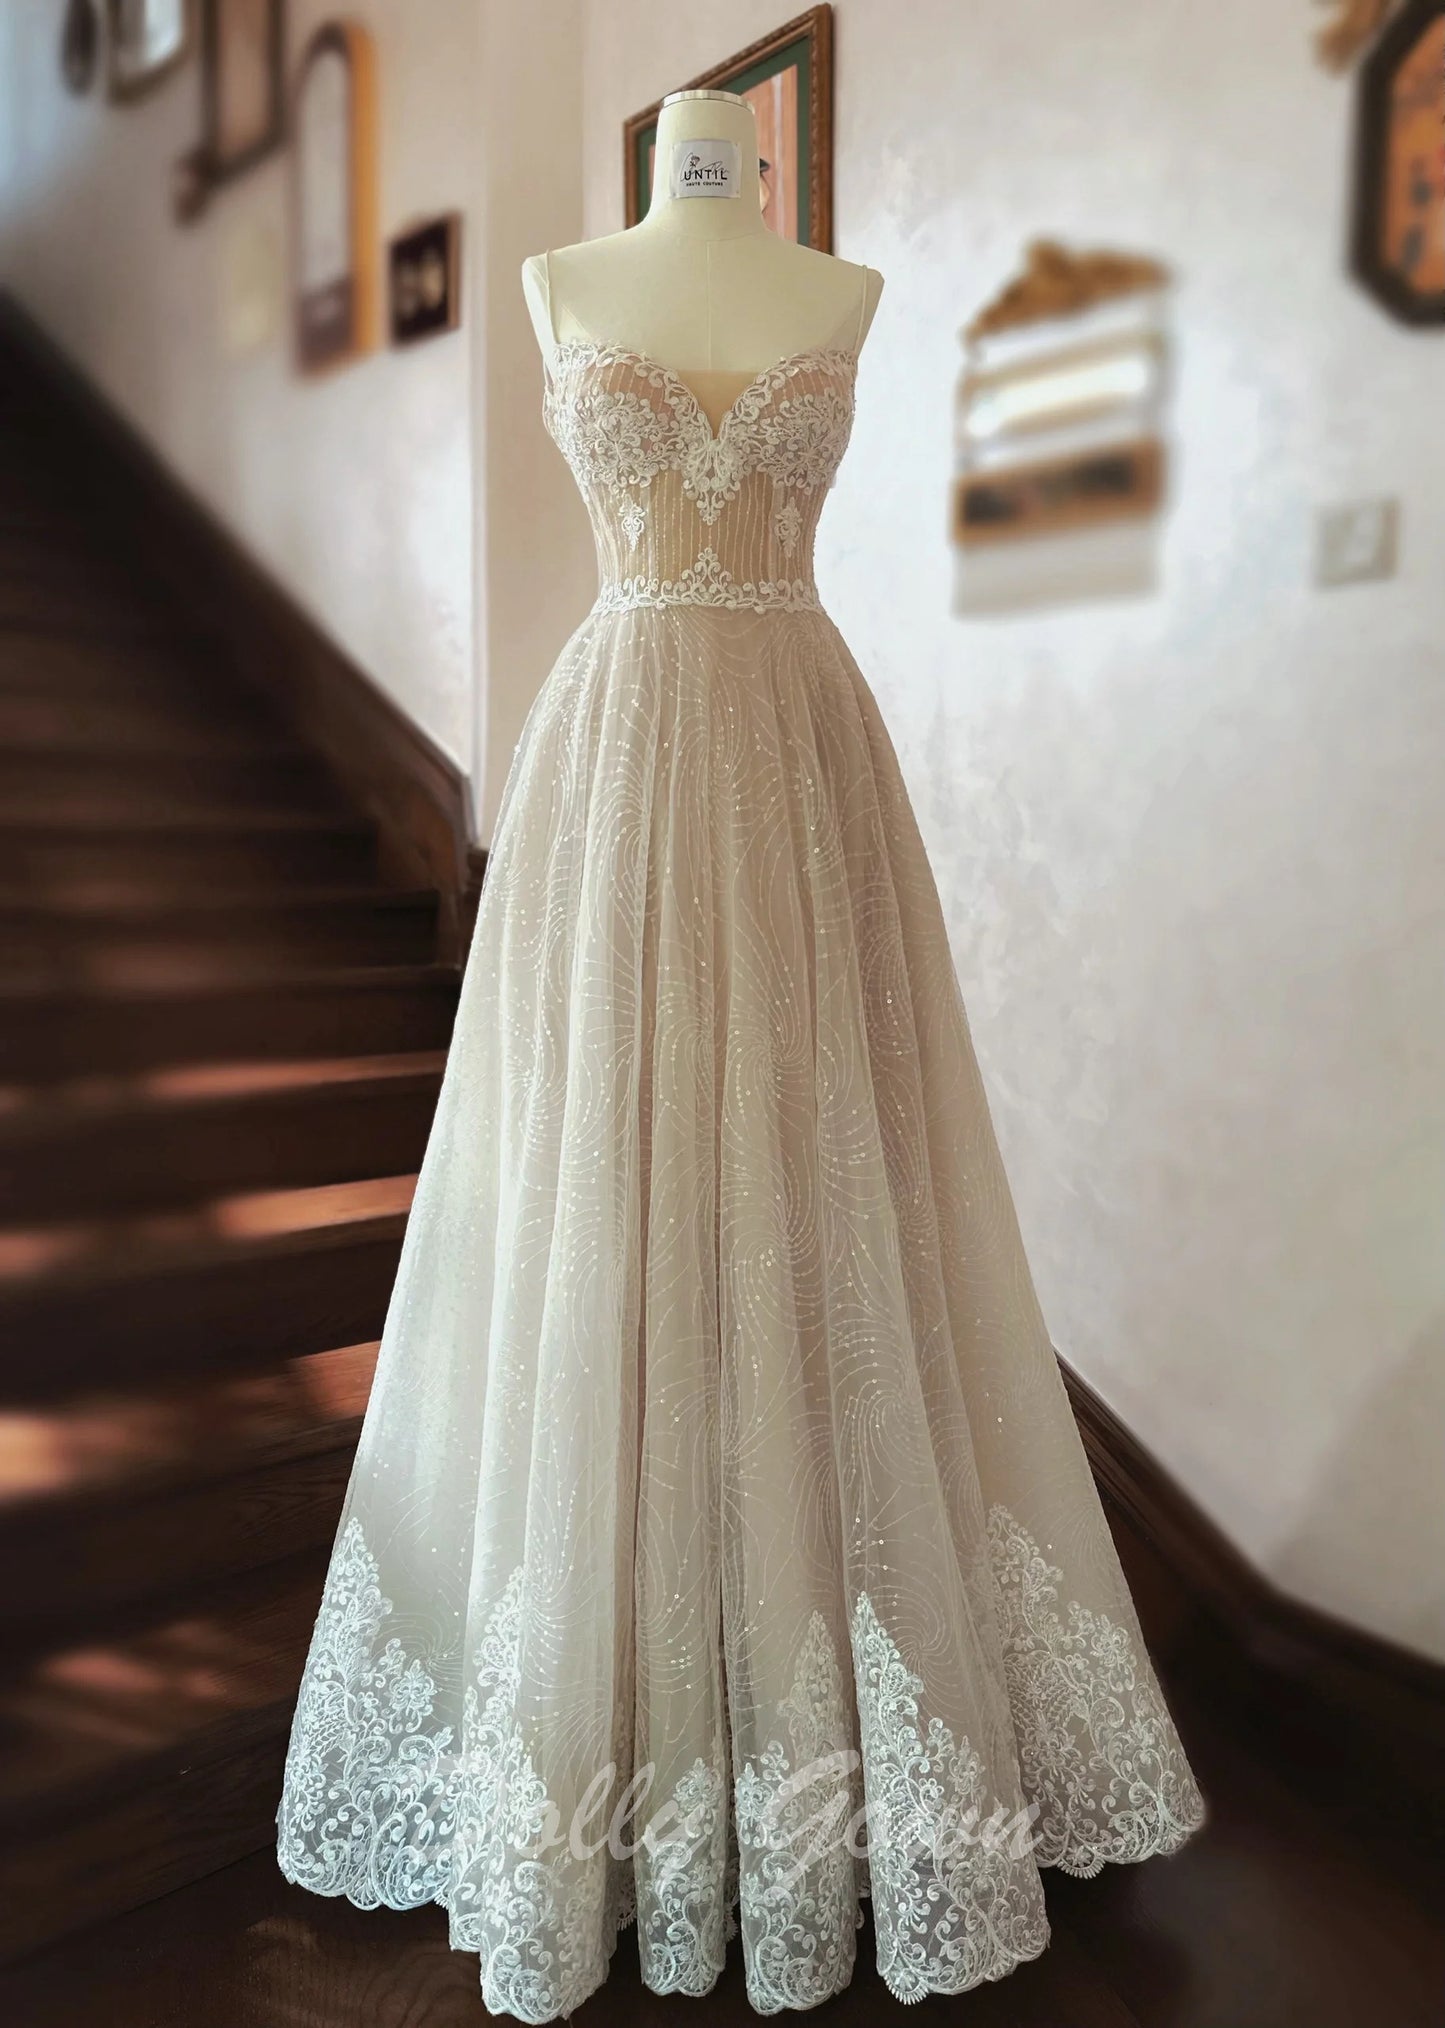 Light Champagne See Through Lace Spaghetti Strap Wedding Dress - DollyGown